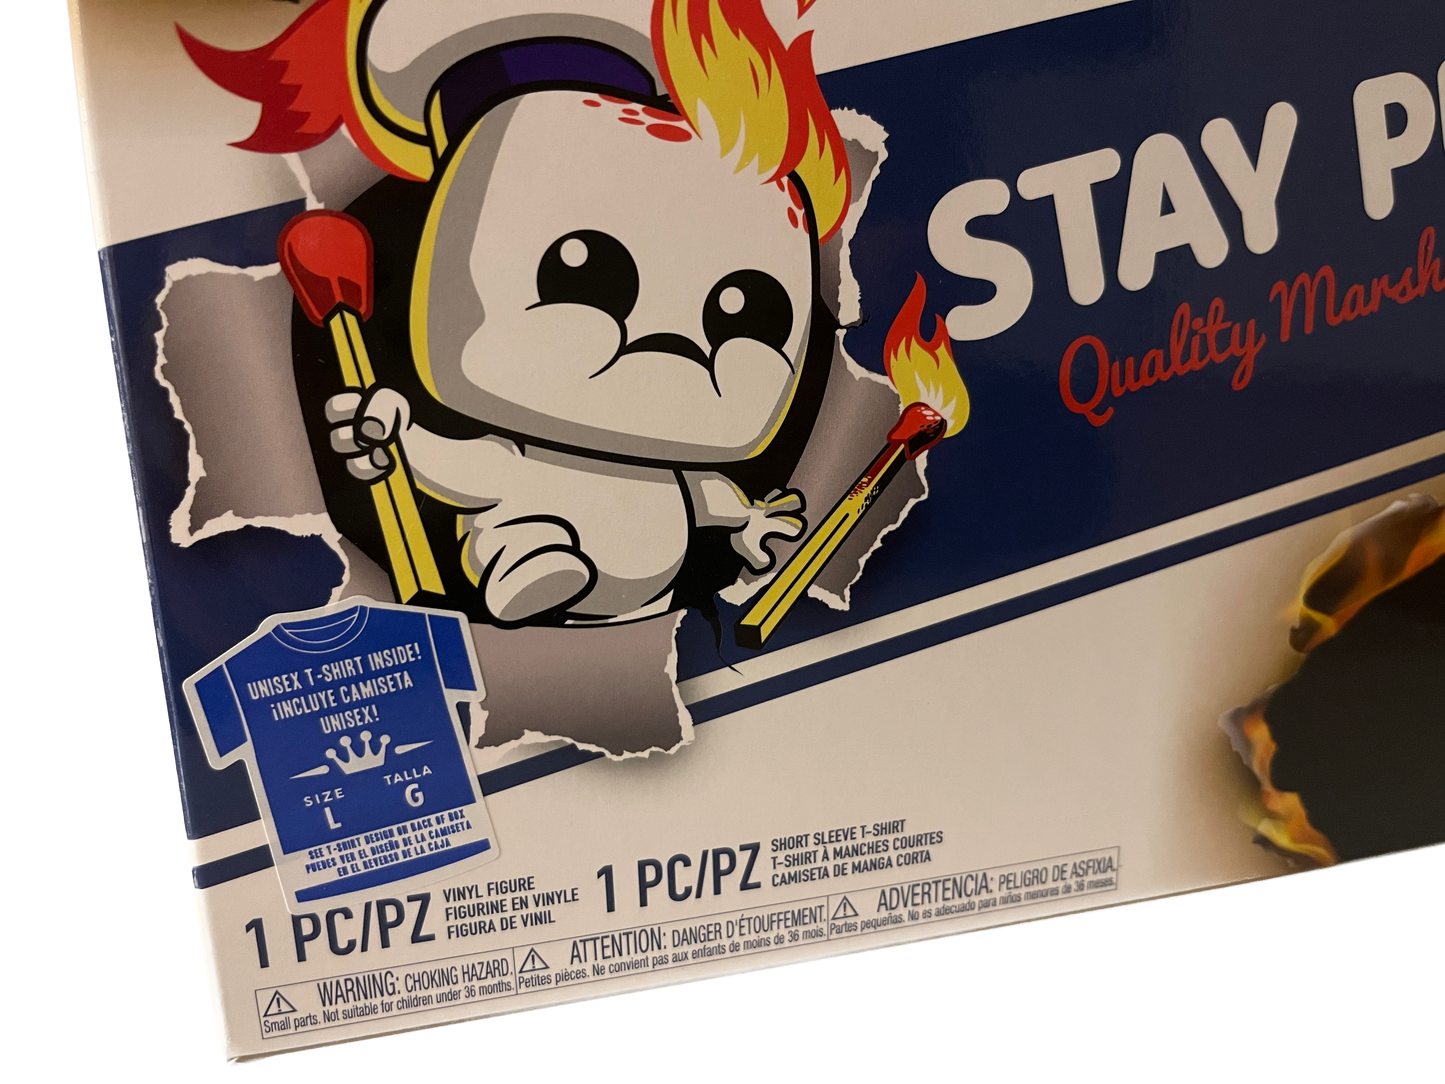 Funko Pop Tees Stay Puft T-Shirt & Glows in the Dark Figur Ghostbusters Afterlife